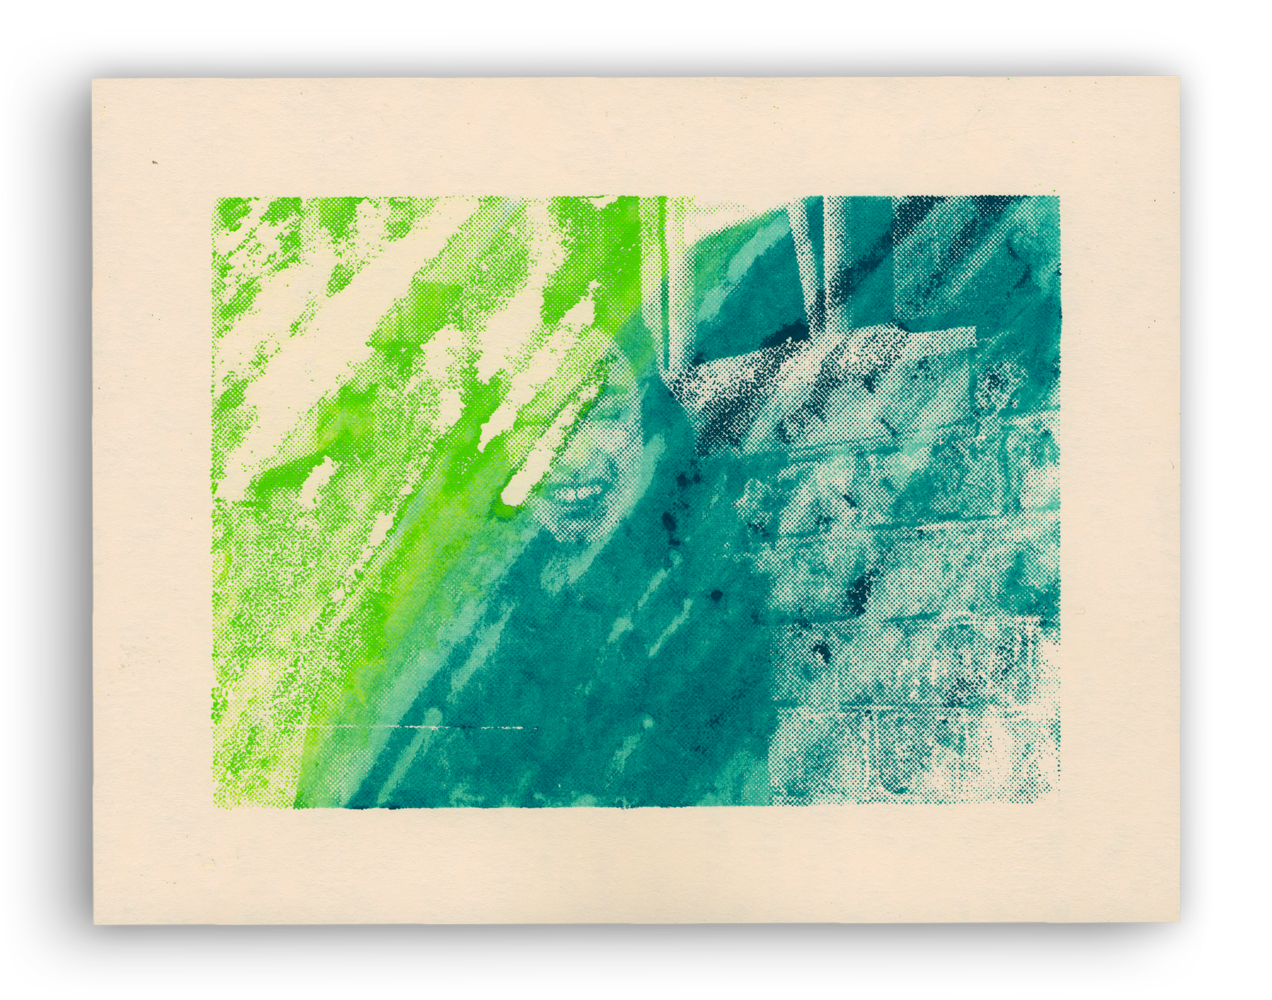 A ghost print from the 6th row of prints. As the ghost prints progress, the colors bleed into each other more and gradually fill the negative space, before getting fainter again.